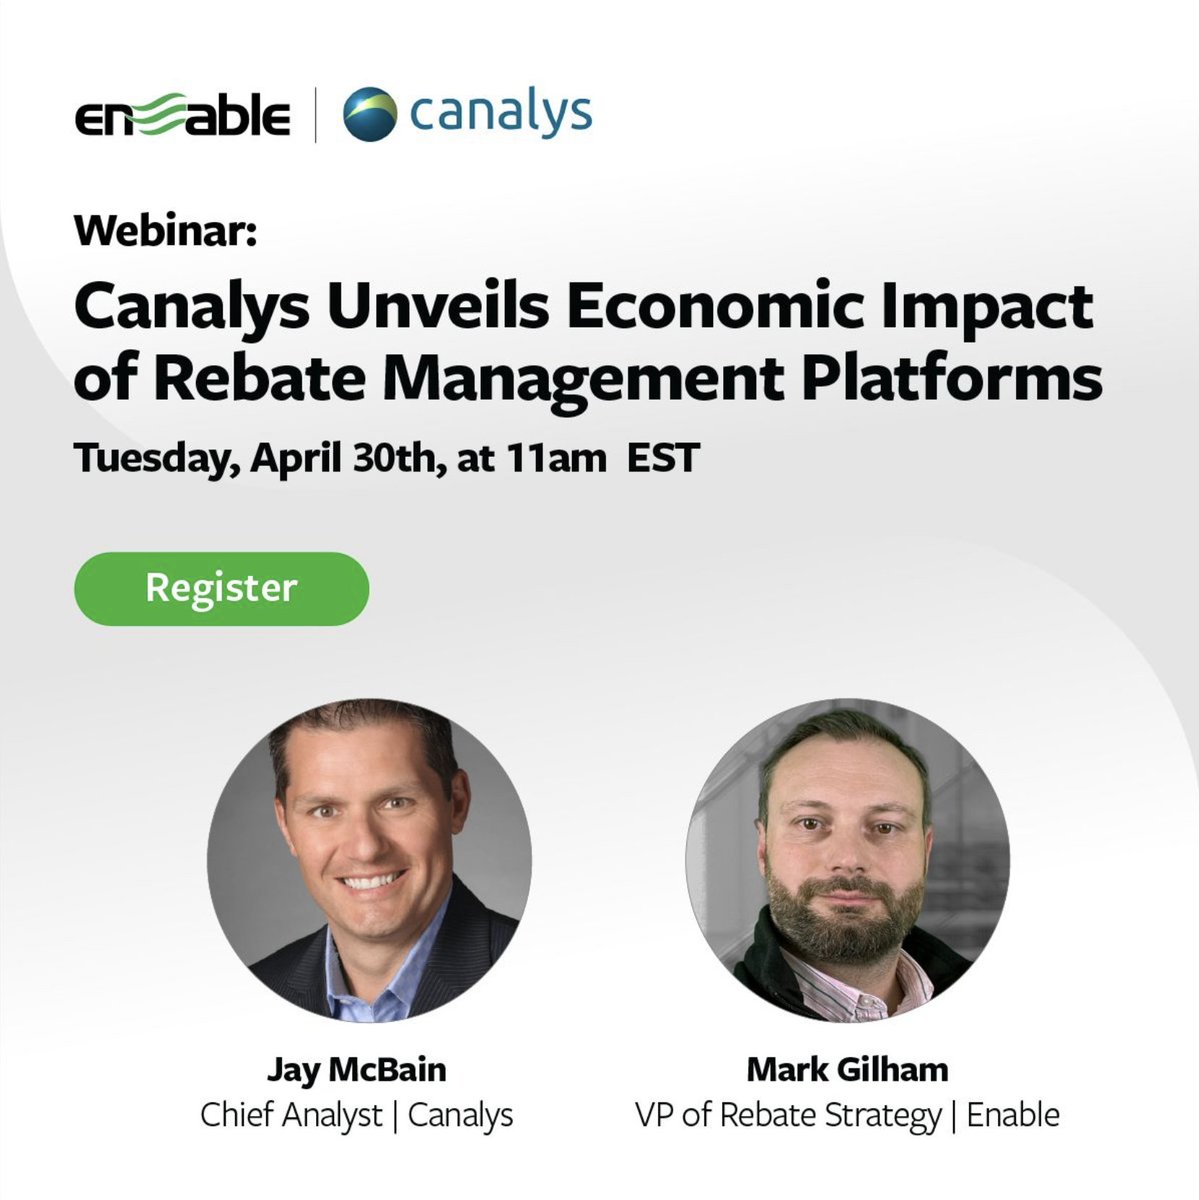 Excited to join Mark Gilham at Enable tomorrow about transforming rebate management strategy & driving growth. On Tue, Apr 30th at 11AM ET, we will explore insights from the recent report with @Canalys on how Enable accelerates savings & boosts revenue. lnkd.in/eAkS2DAh